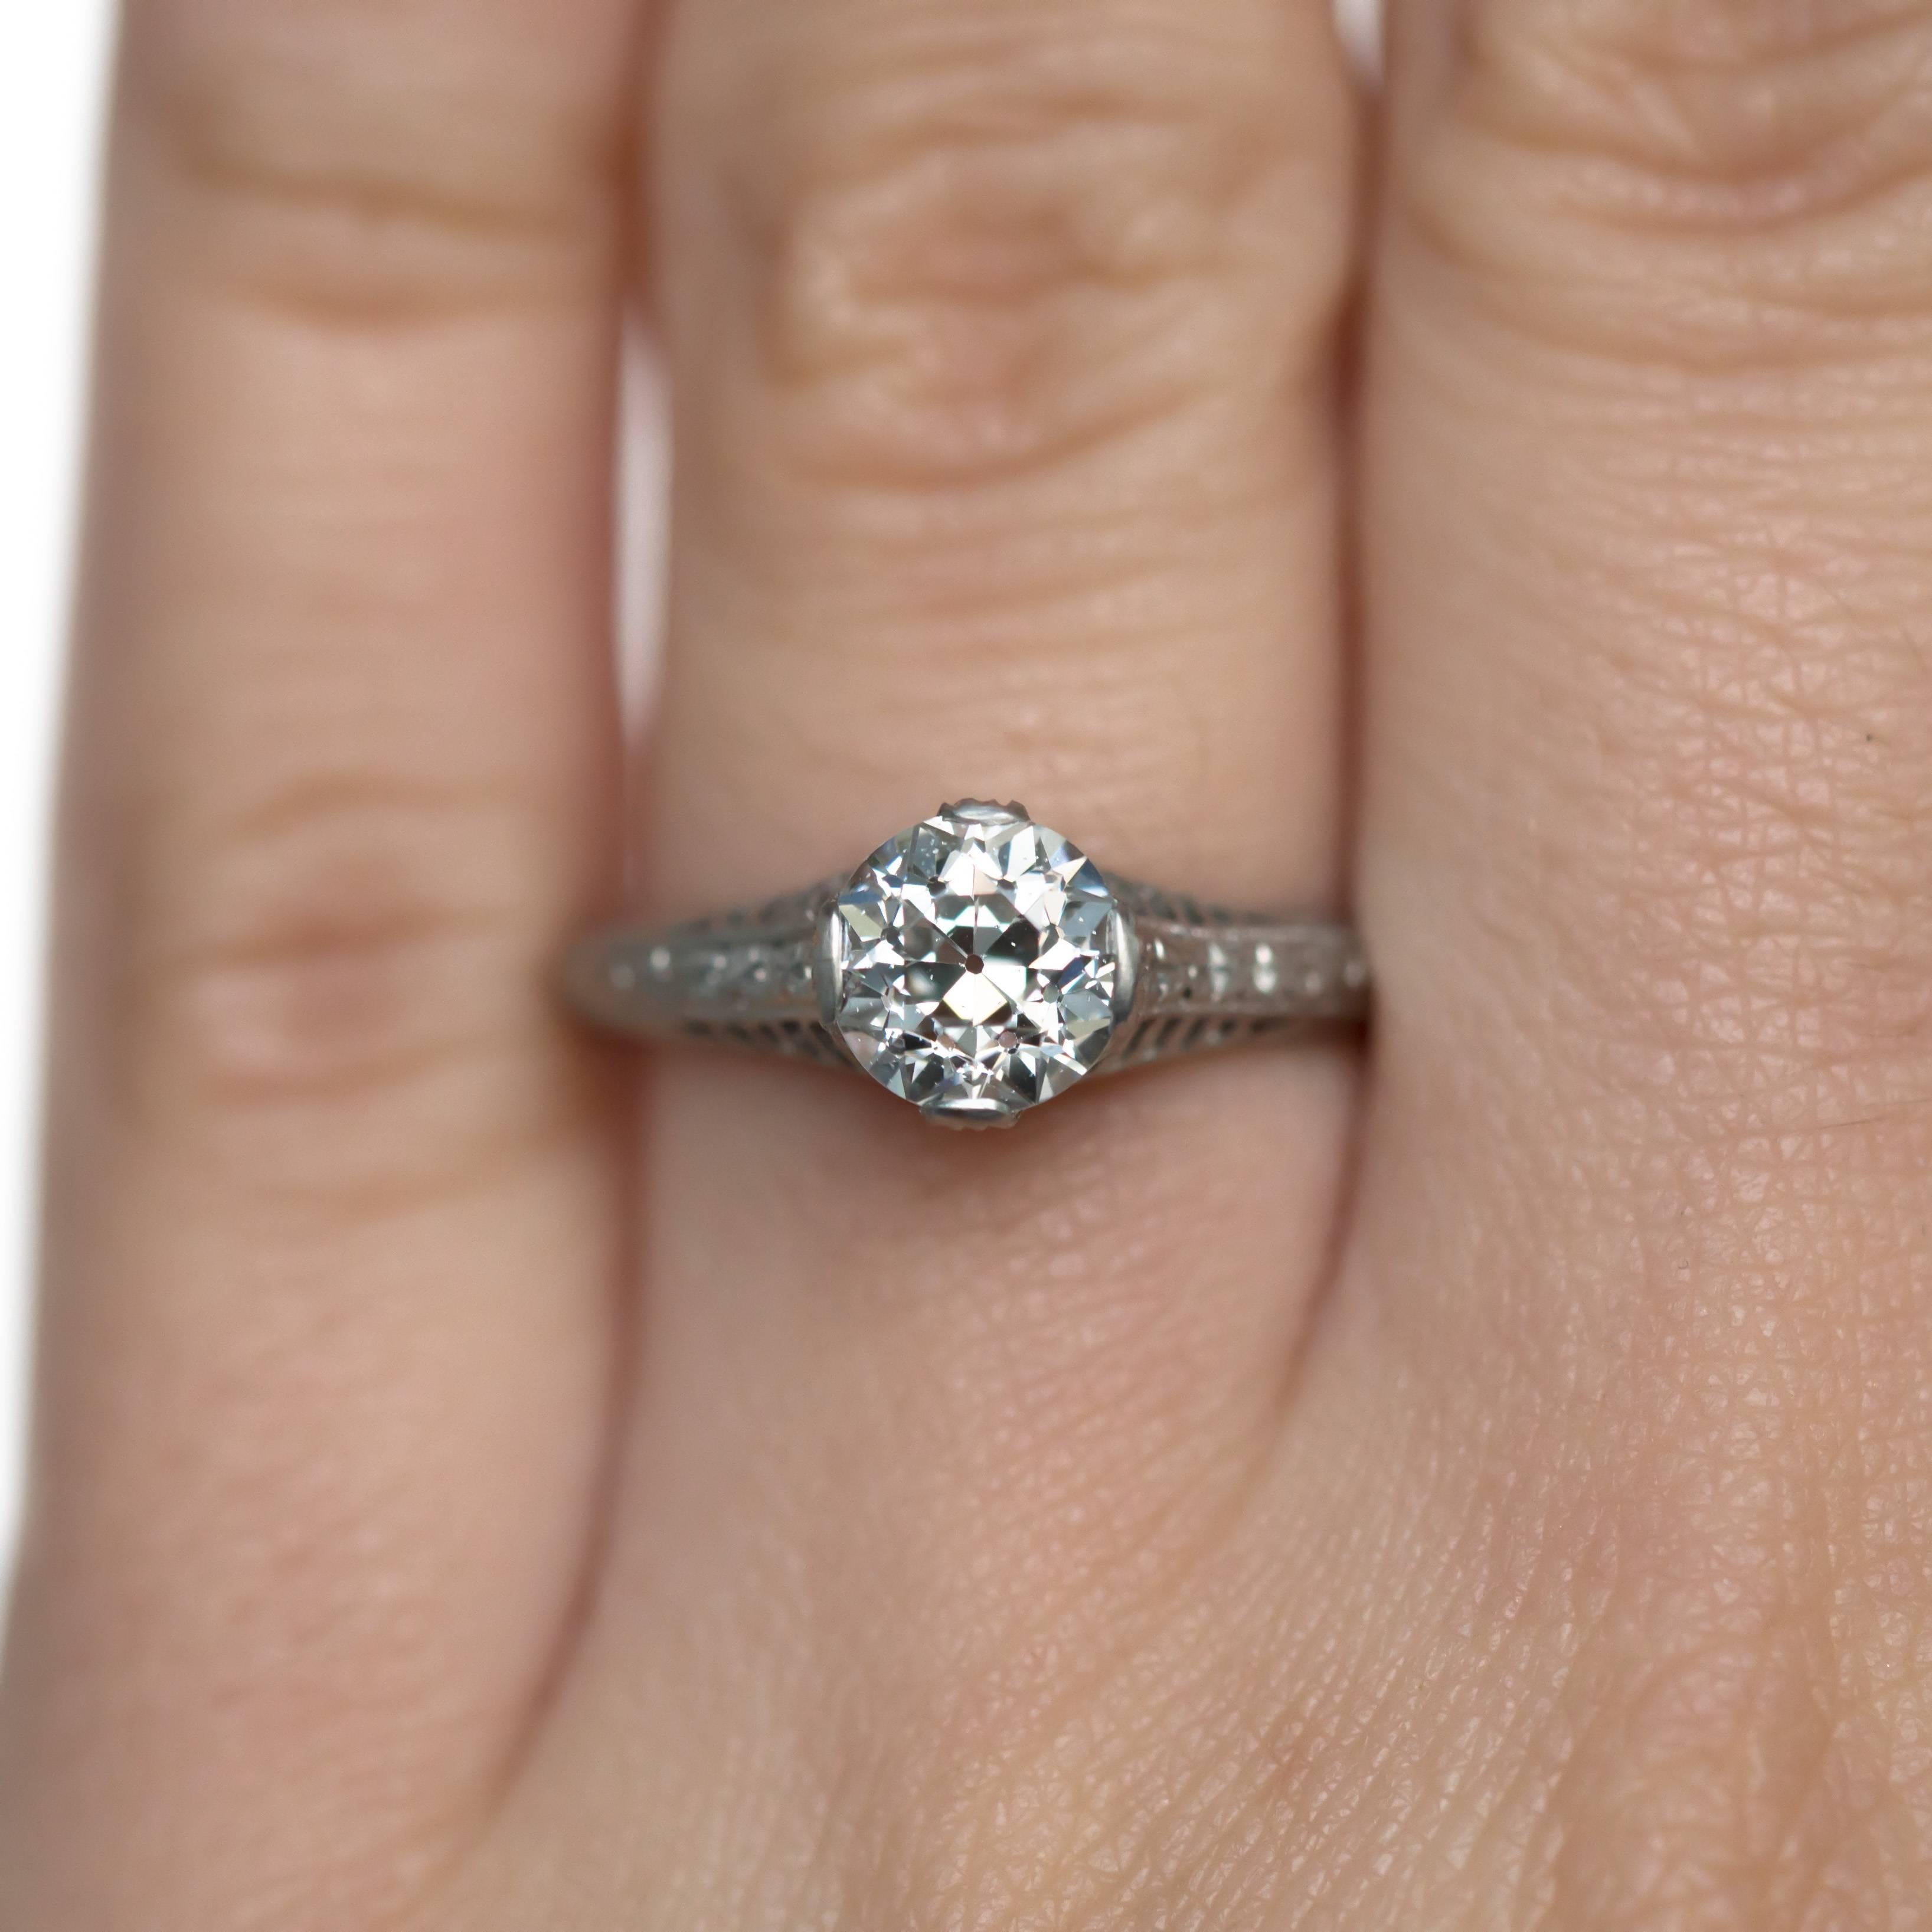 GIA Certified 1.08 Carat Diamond Platinum Engagement Ring In Excellent Condition For Sale In Atlanta, GA